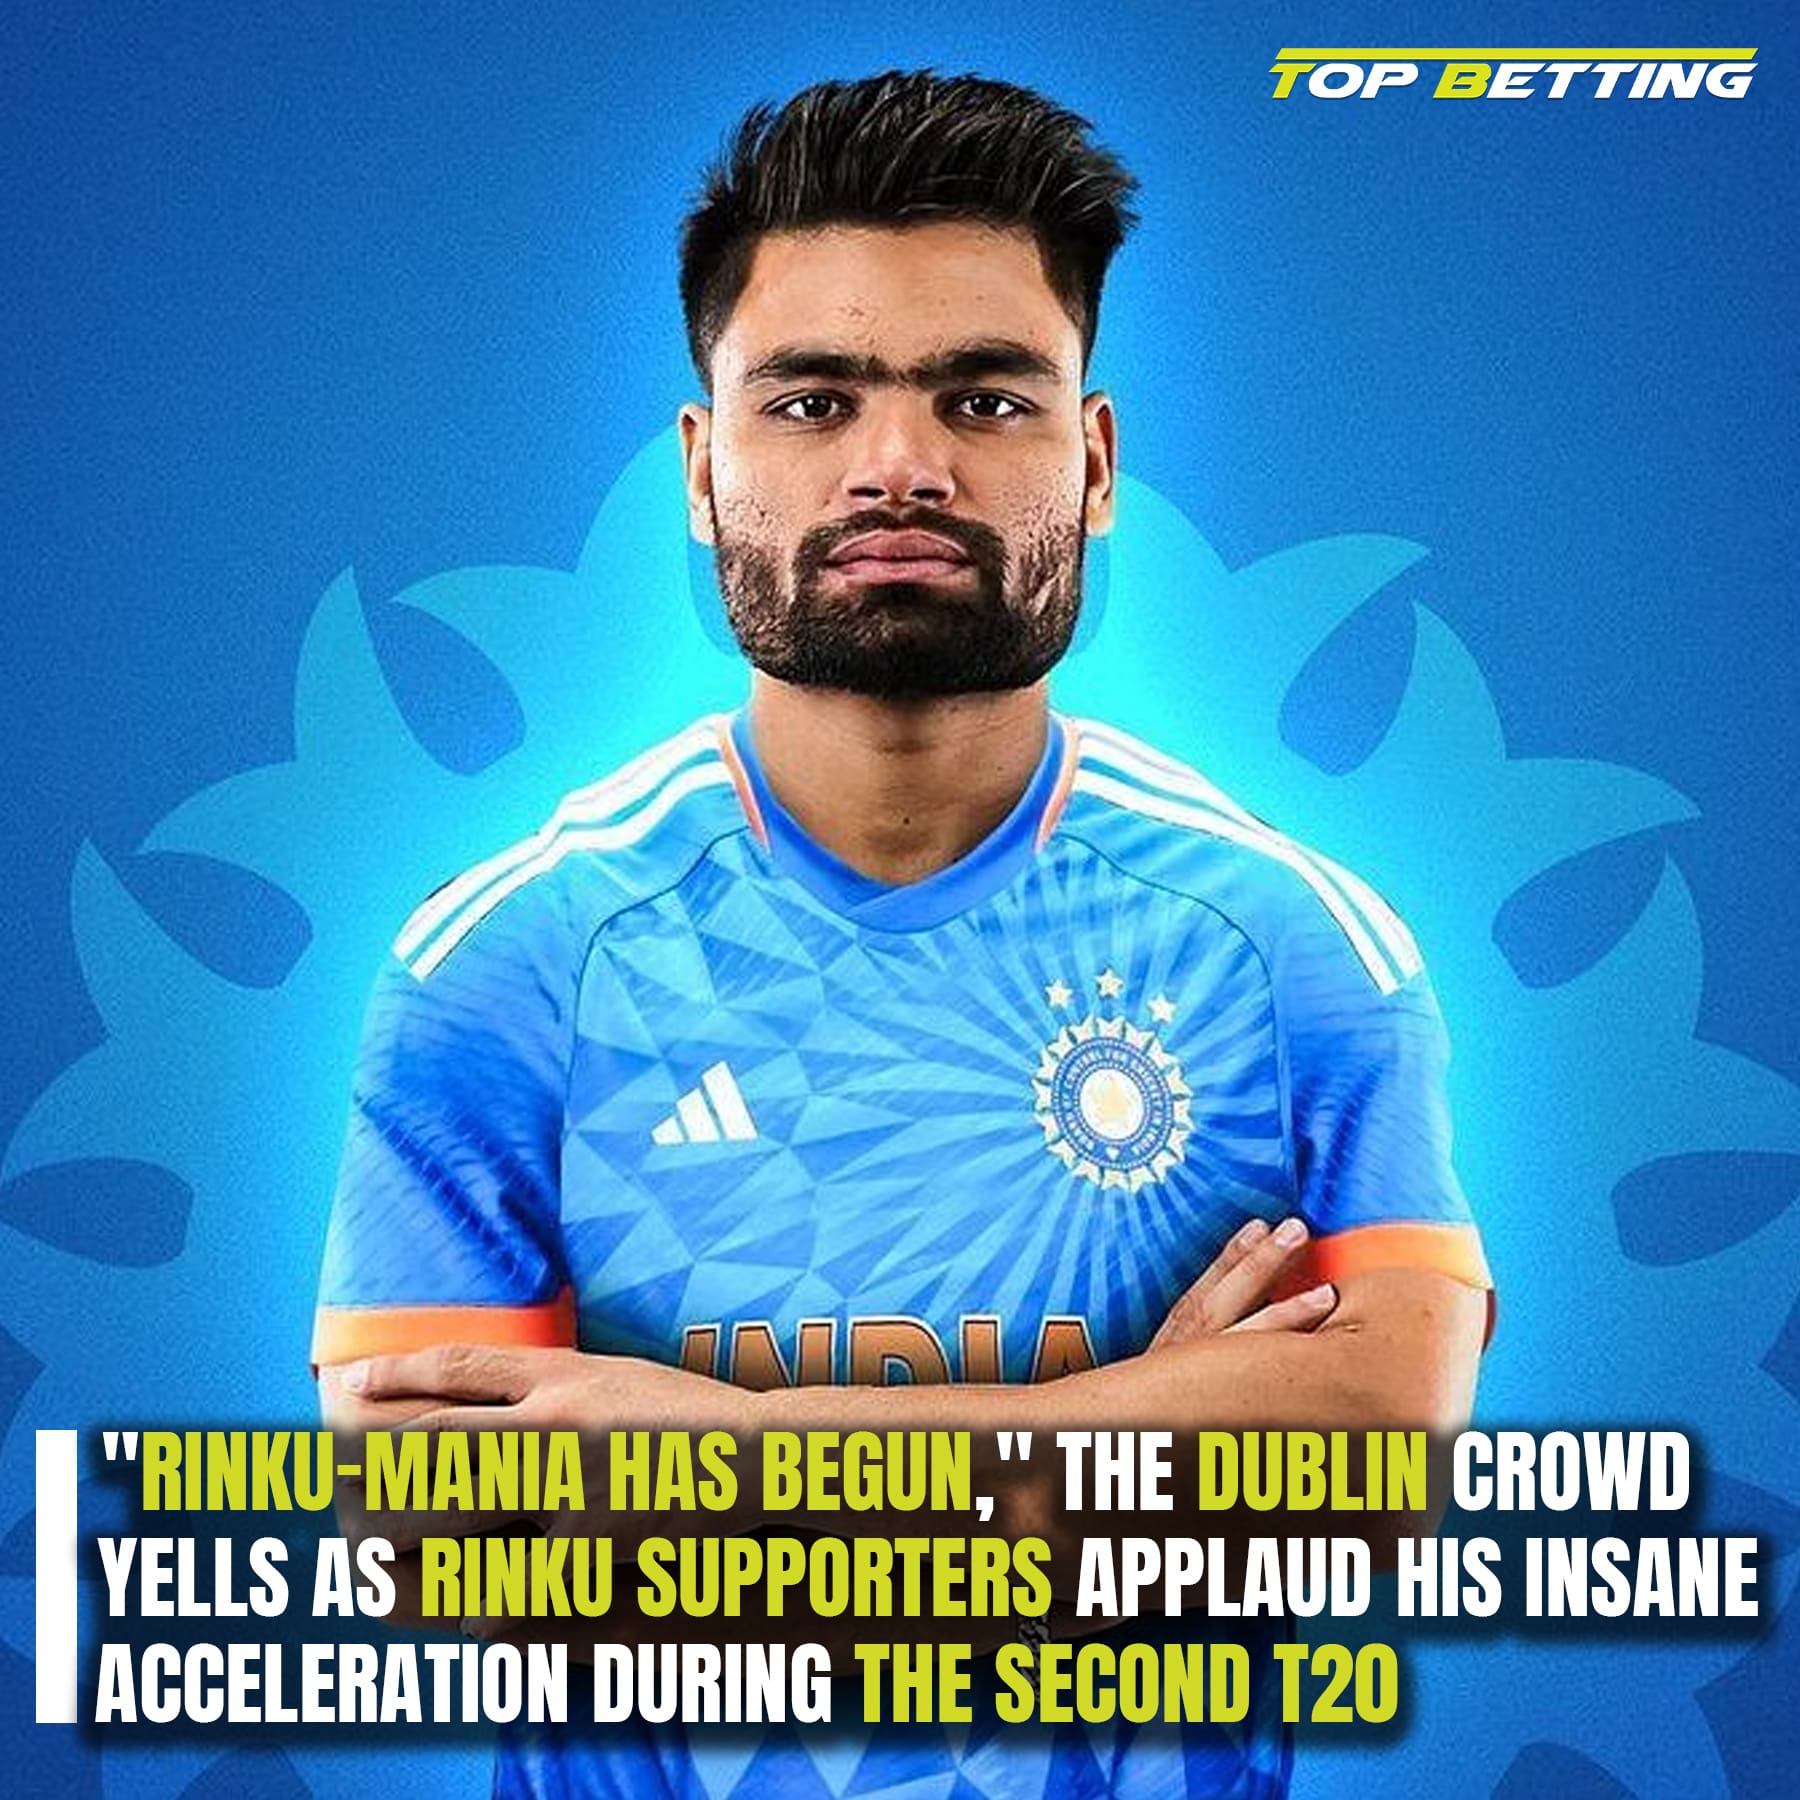 “Rinku-mania has begun,” the Dublin crowd yells as Rinku supporters applaud his insane acceleration during the second T20